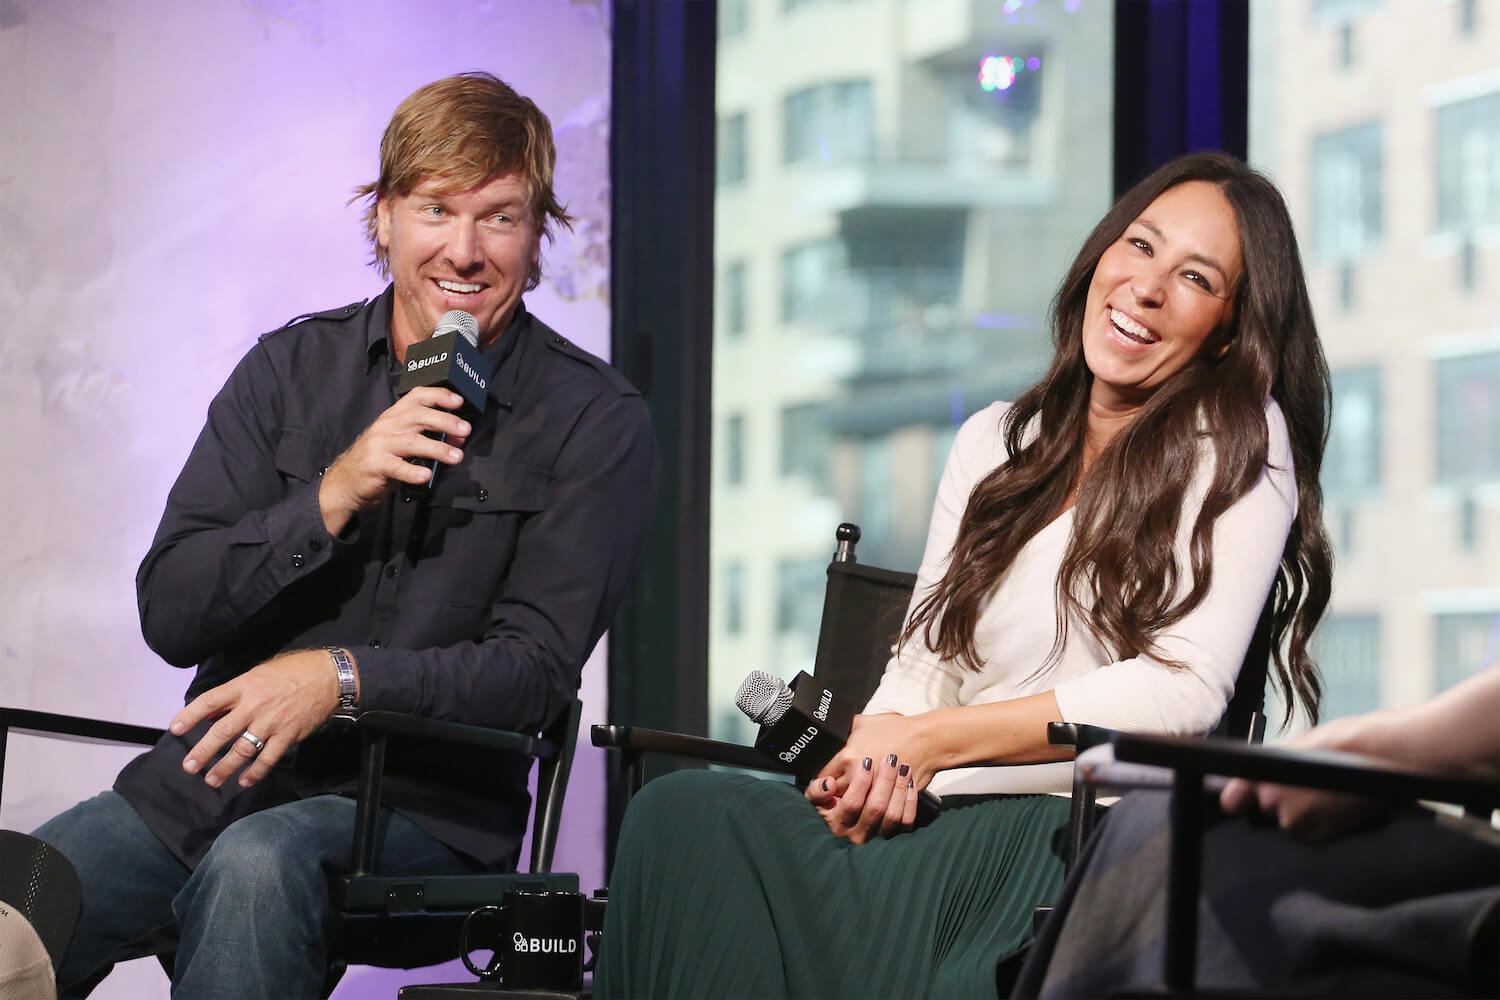 Chip and Joanna Gaines talking on stage and laughing